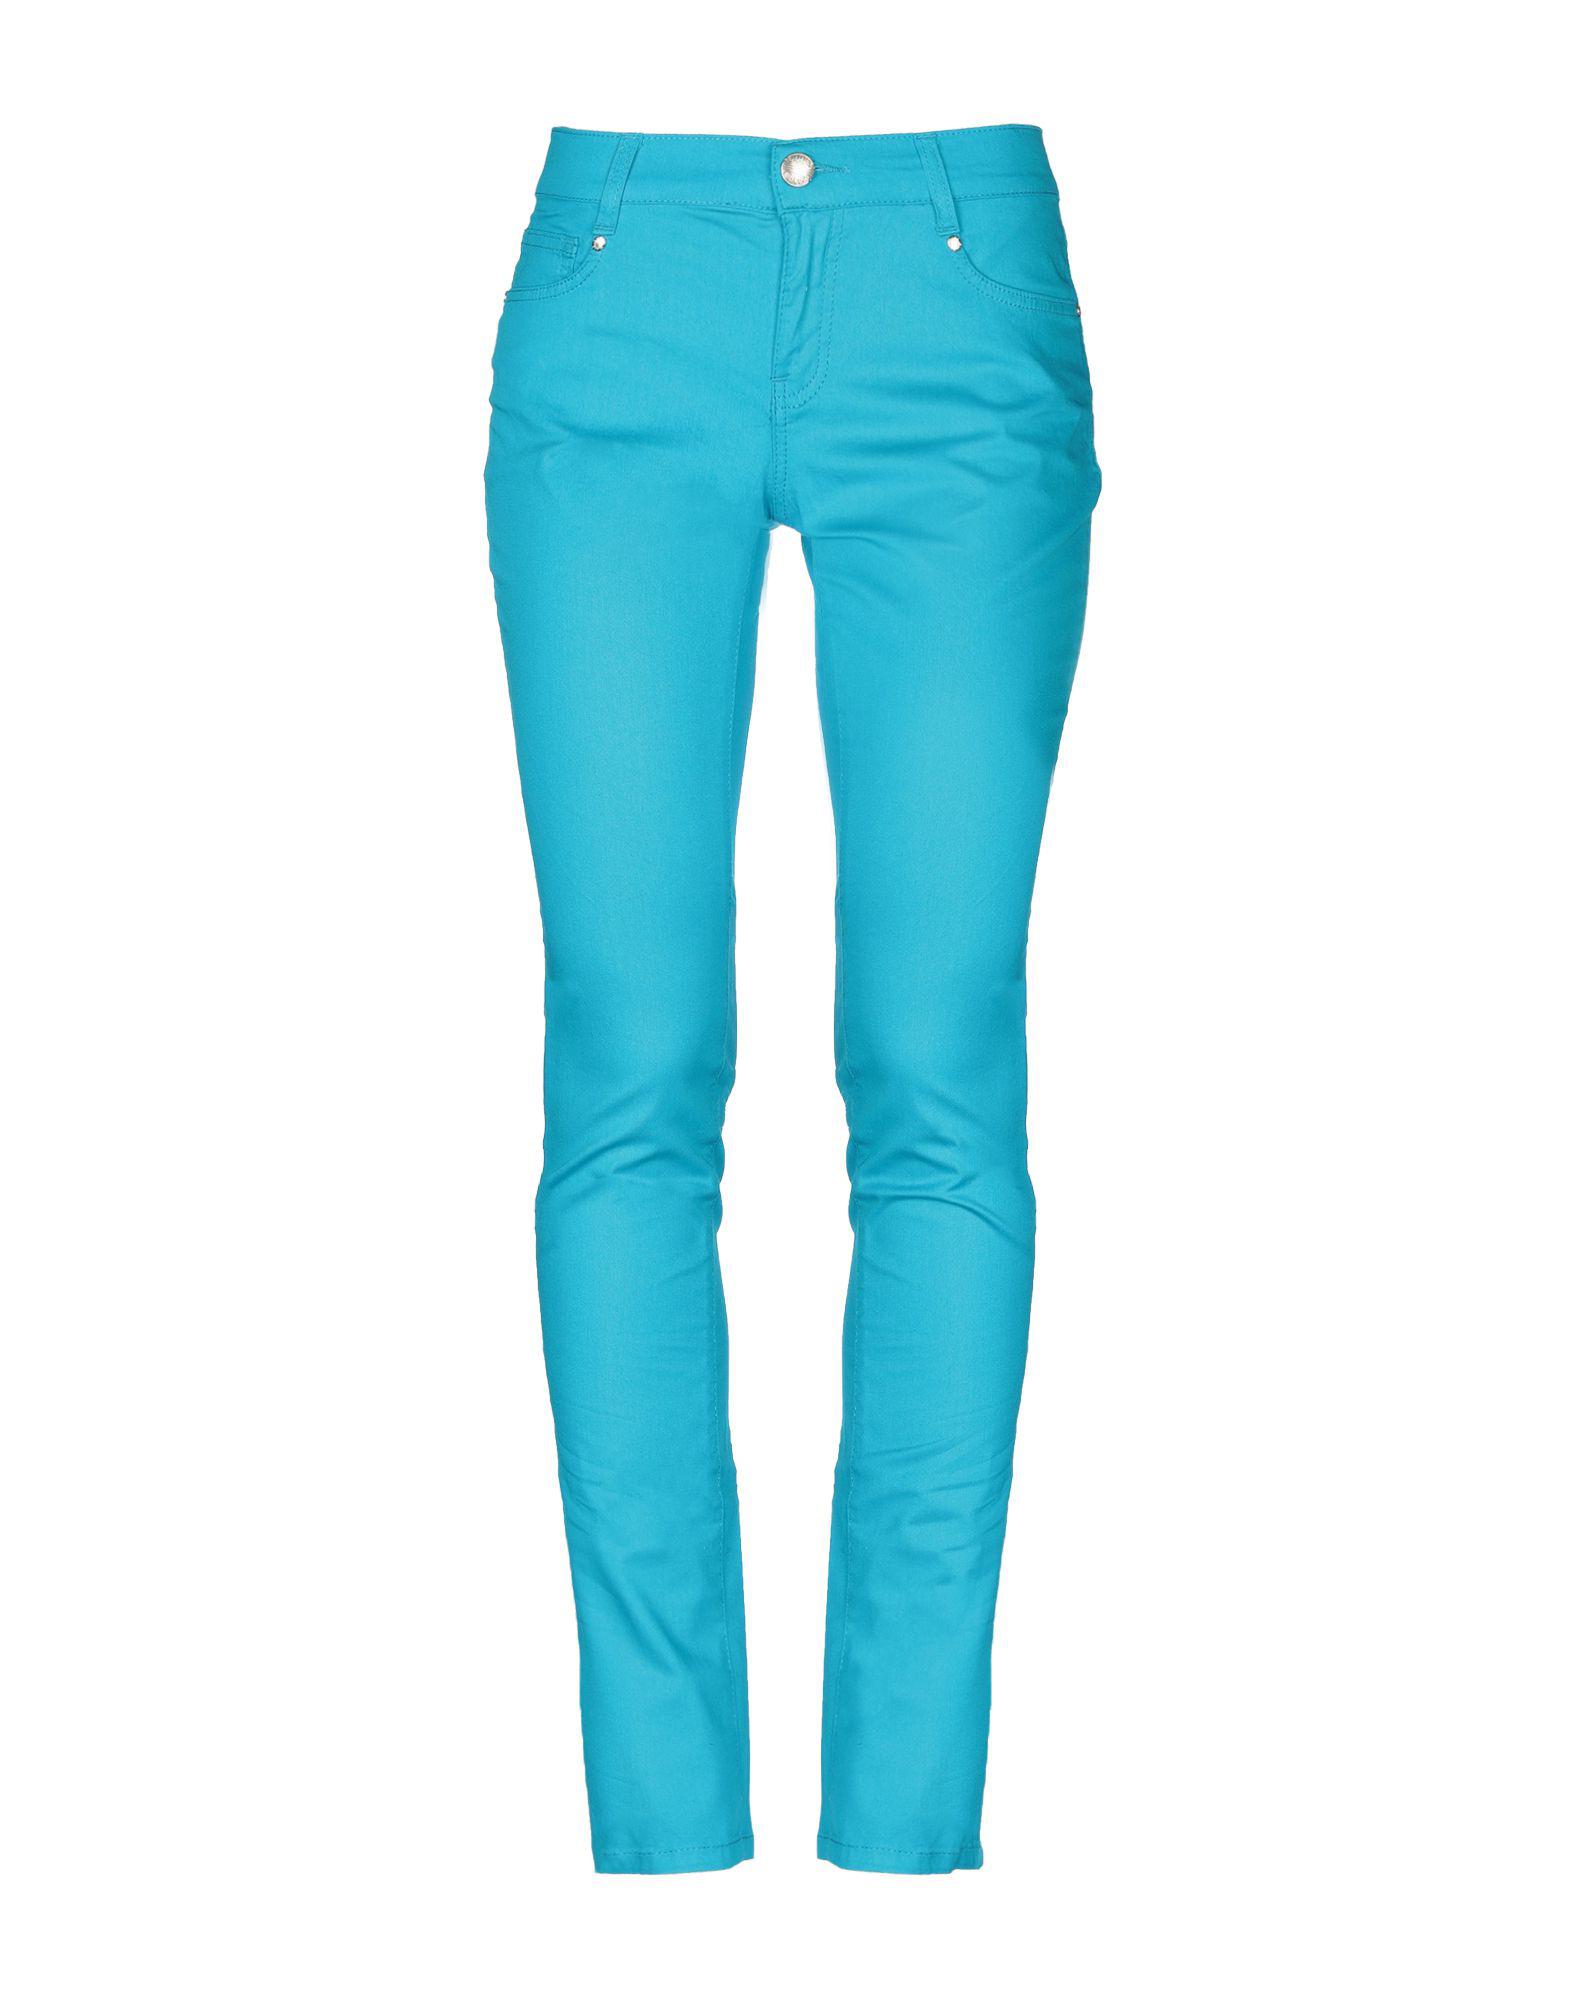 Versace Jeans Cotton Casual Trouser in Turquoise (Blue) - Lyst